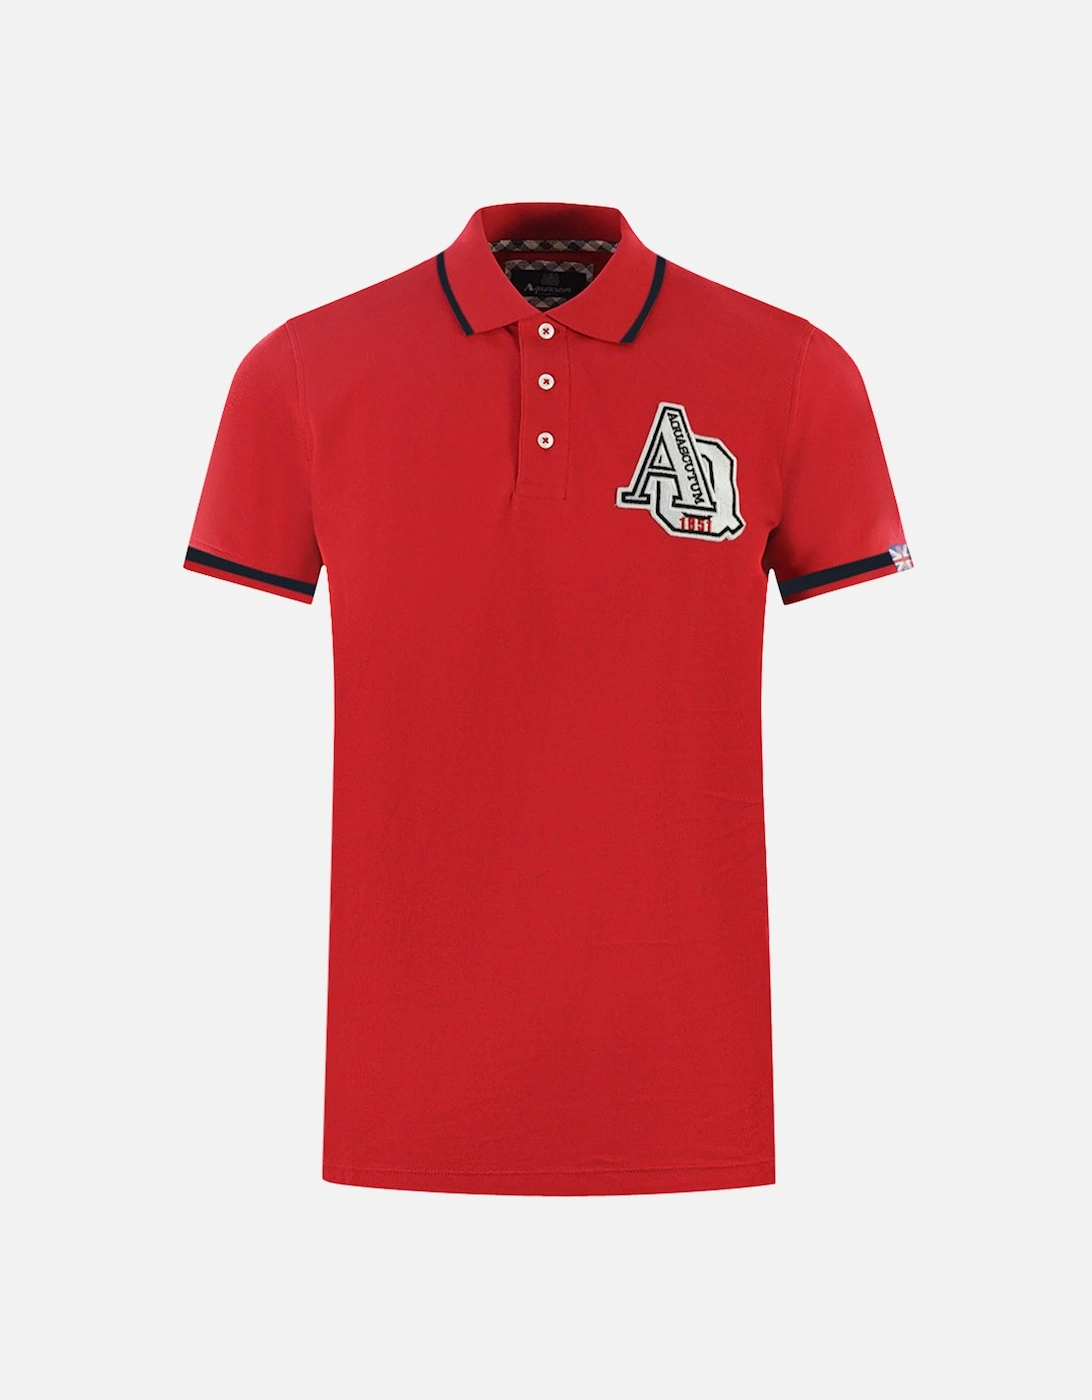 AQ 1851 Embroidered Tipped Red Polo Shirt, 4 of 3